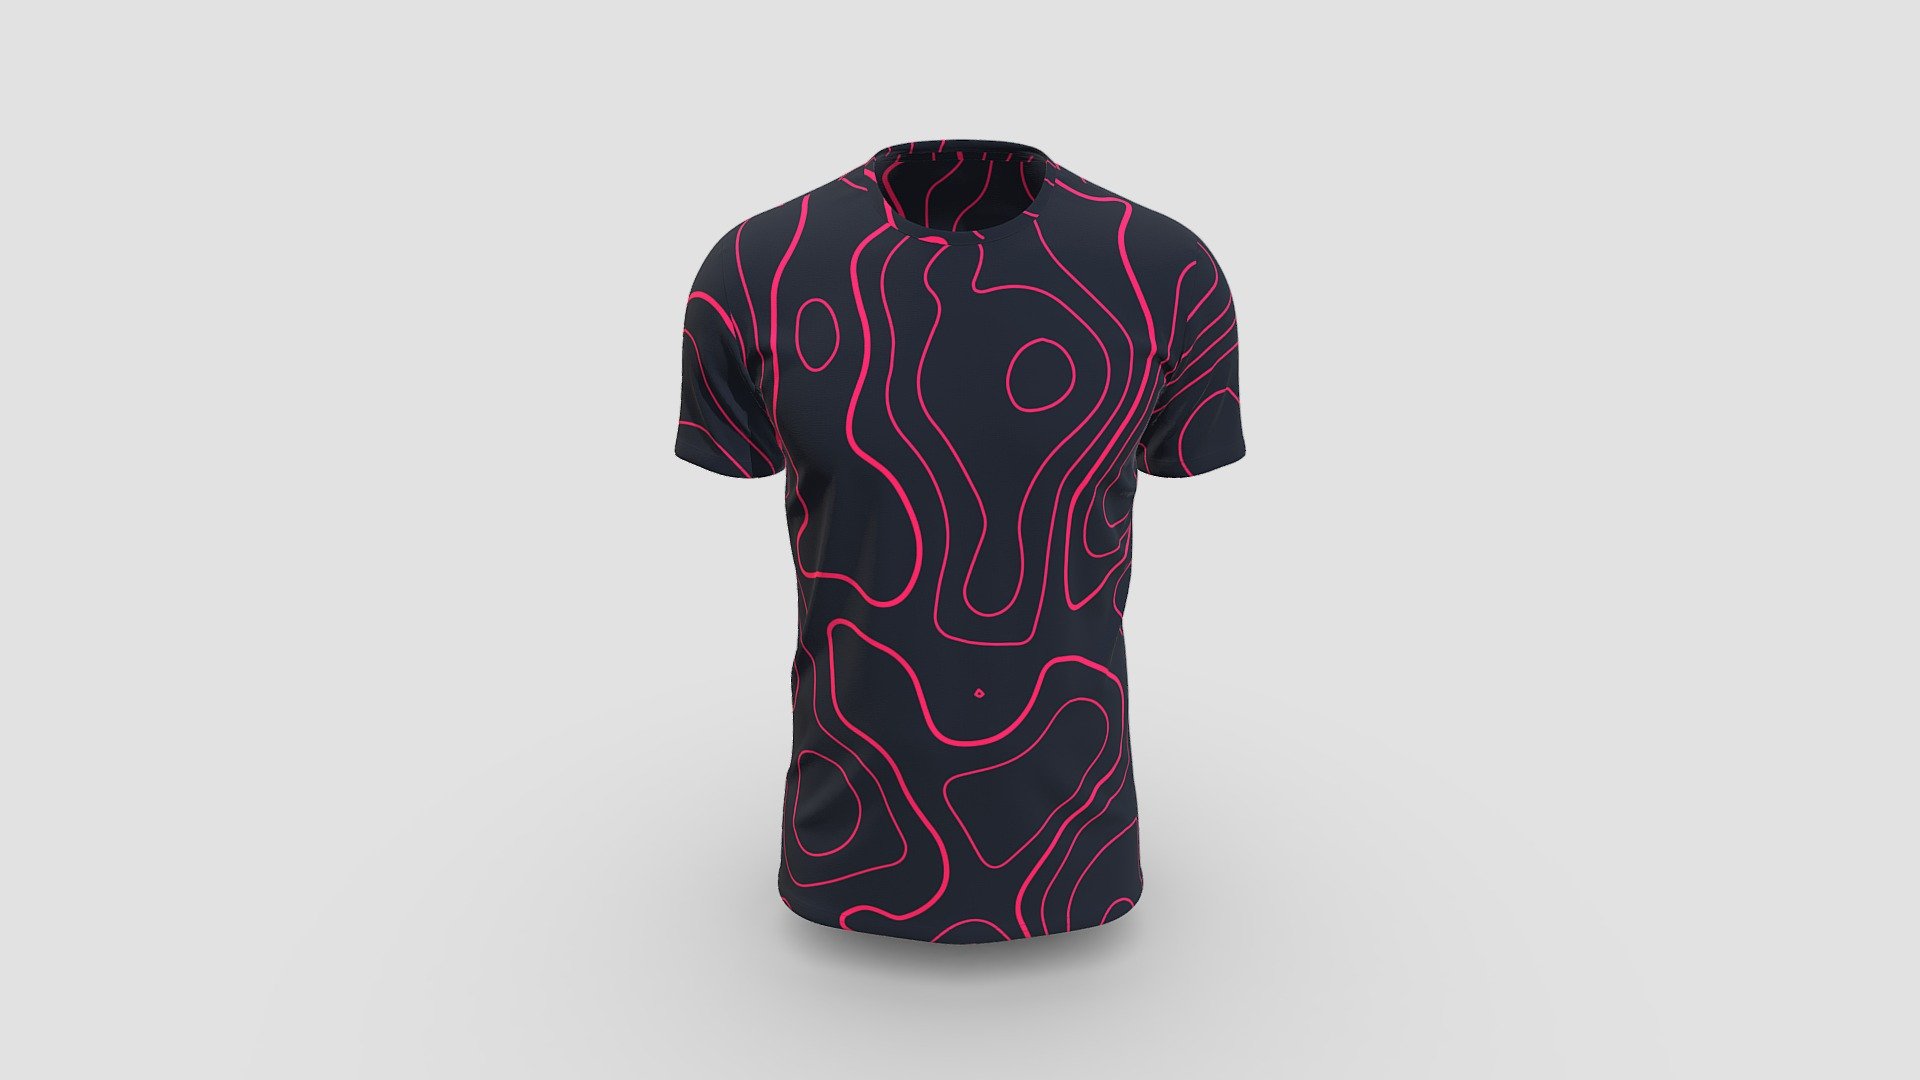 Cloth Title = Short Sleeve Casual Slim Fit T-Shirt Premium Cloth

SKU = DG100053

Product Type = T-Shirt
 
Cloth Length = Regular
 
Body Fit = Slim Fit
 
Occasion = Casual

Sleeve Style = Set In Sleeve


Our Services:

3D Apparel Design.

OBJ,FBX,GLTF Making with High/Low Poly.

Fabric Digitalization.

Mockup making.

3D Teck Pack.

Pattern Making.

2D Illustration.

Cloth Animation and 360 Spin Video.


Contact us:- 

Email: info@digitalfashionwear.com 

Website: https://digitalfashionwear.com 

WhatsApp No: +8801759350445 


We designed all the types of cloth specially focused on product visualization, e-commerce, fitting, and production. 

We will design: 

T-shirts 

Polo shirts 

Hoodies 

Sweatshirt 

Jackets 

Shirts 

TankTops 

Trousers 

Bras 

Underwear 

Blazer 

Aprons 

Leggings 

and All Fashion items. 





Our goal is to make sure what we provide you, meets your demand 3d model